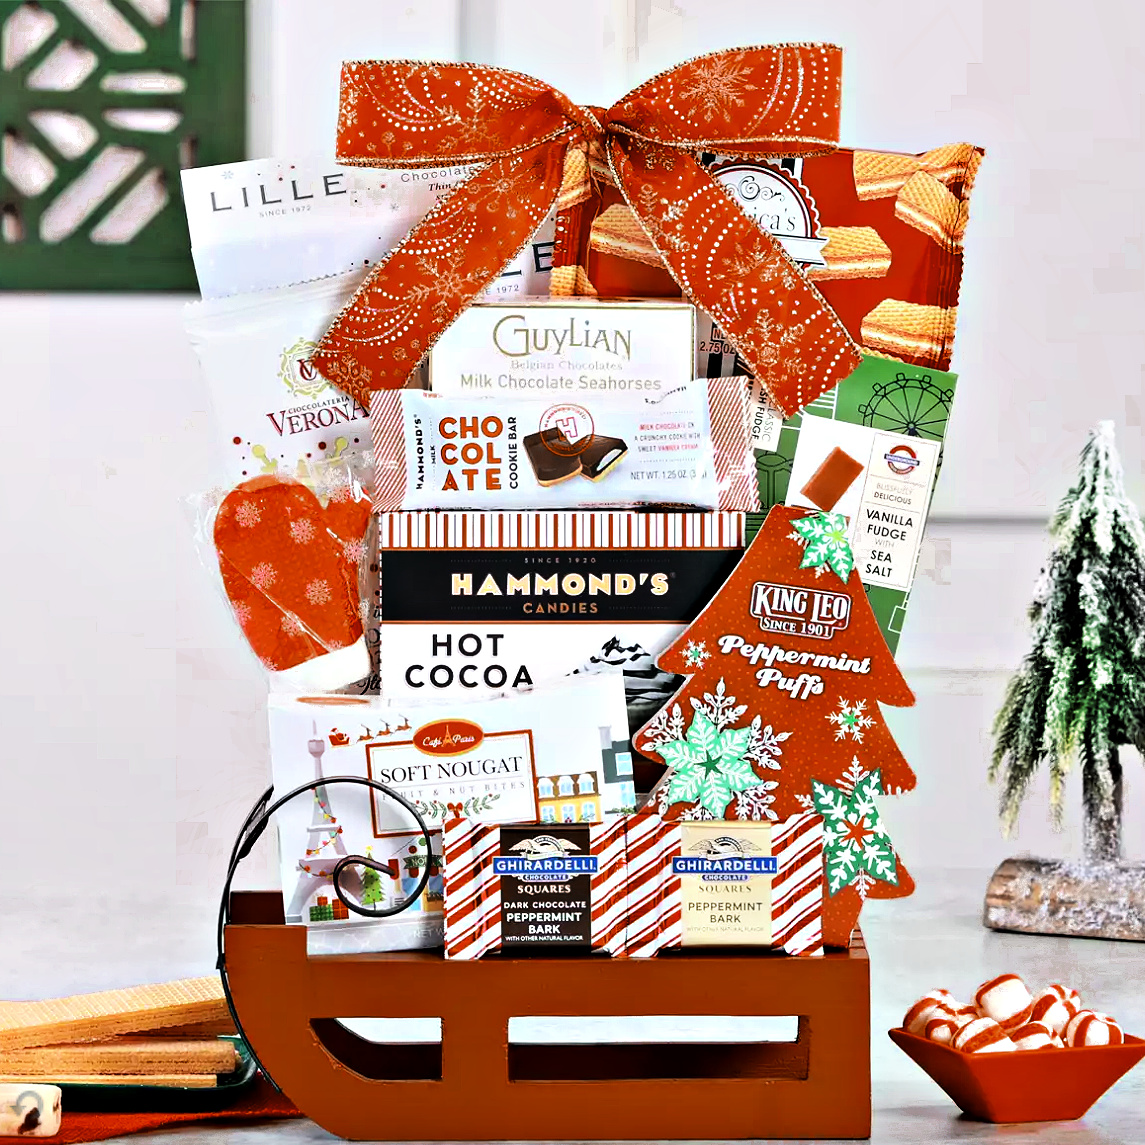 https://images.adorablegiftbaskets.com/media/Cocoa-Chocolate-and-Brownie-Sleigh-at-Adorable-Gift-Baskets.jpg